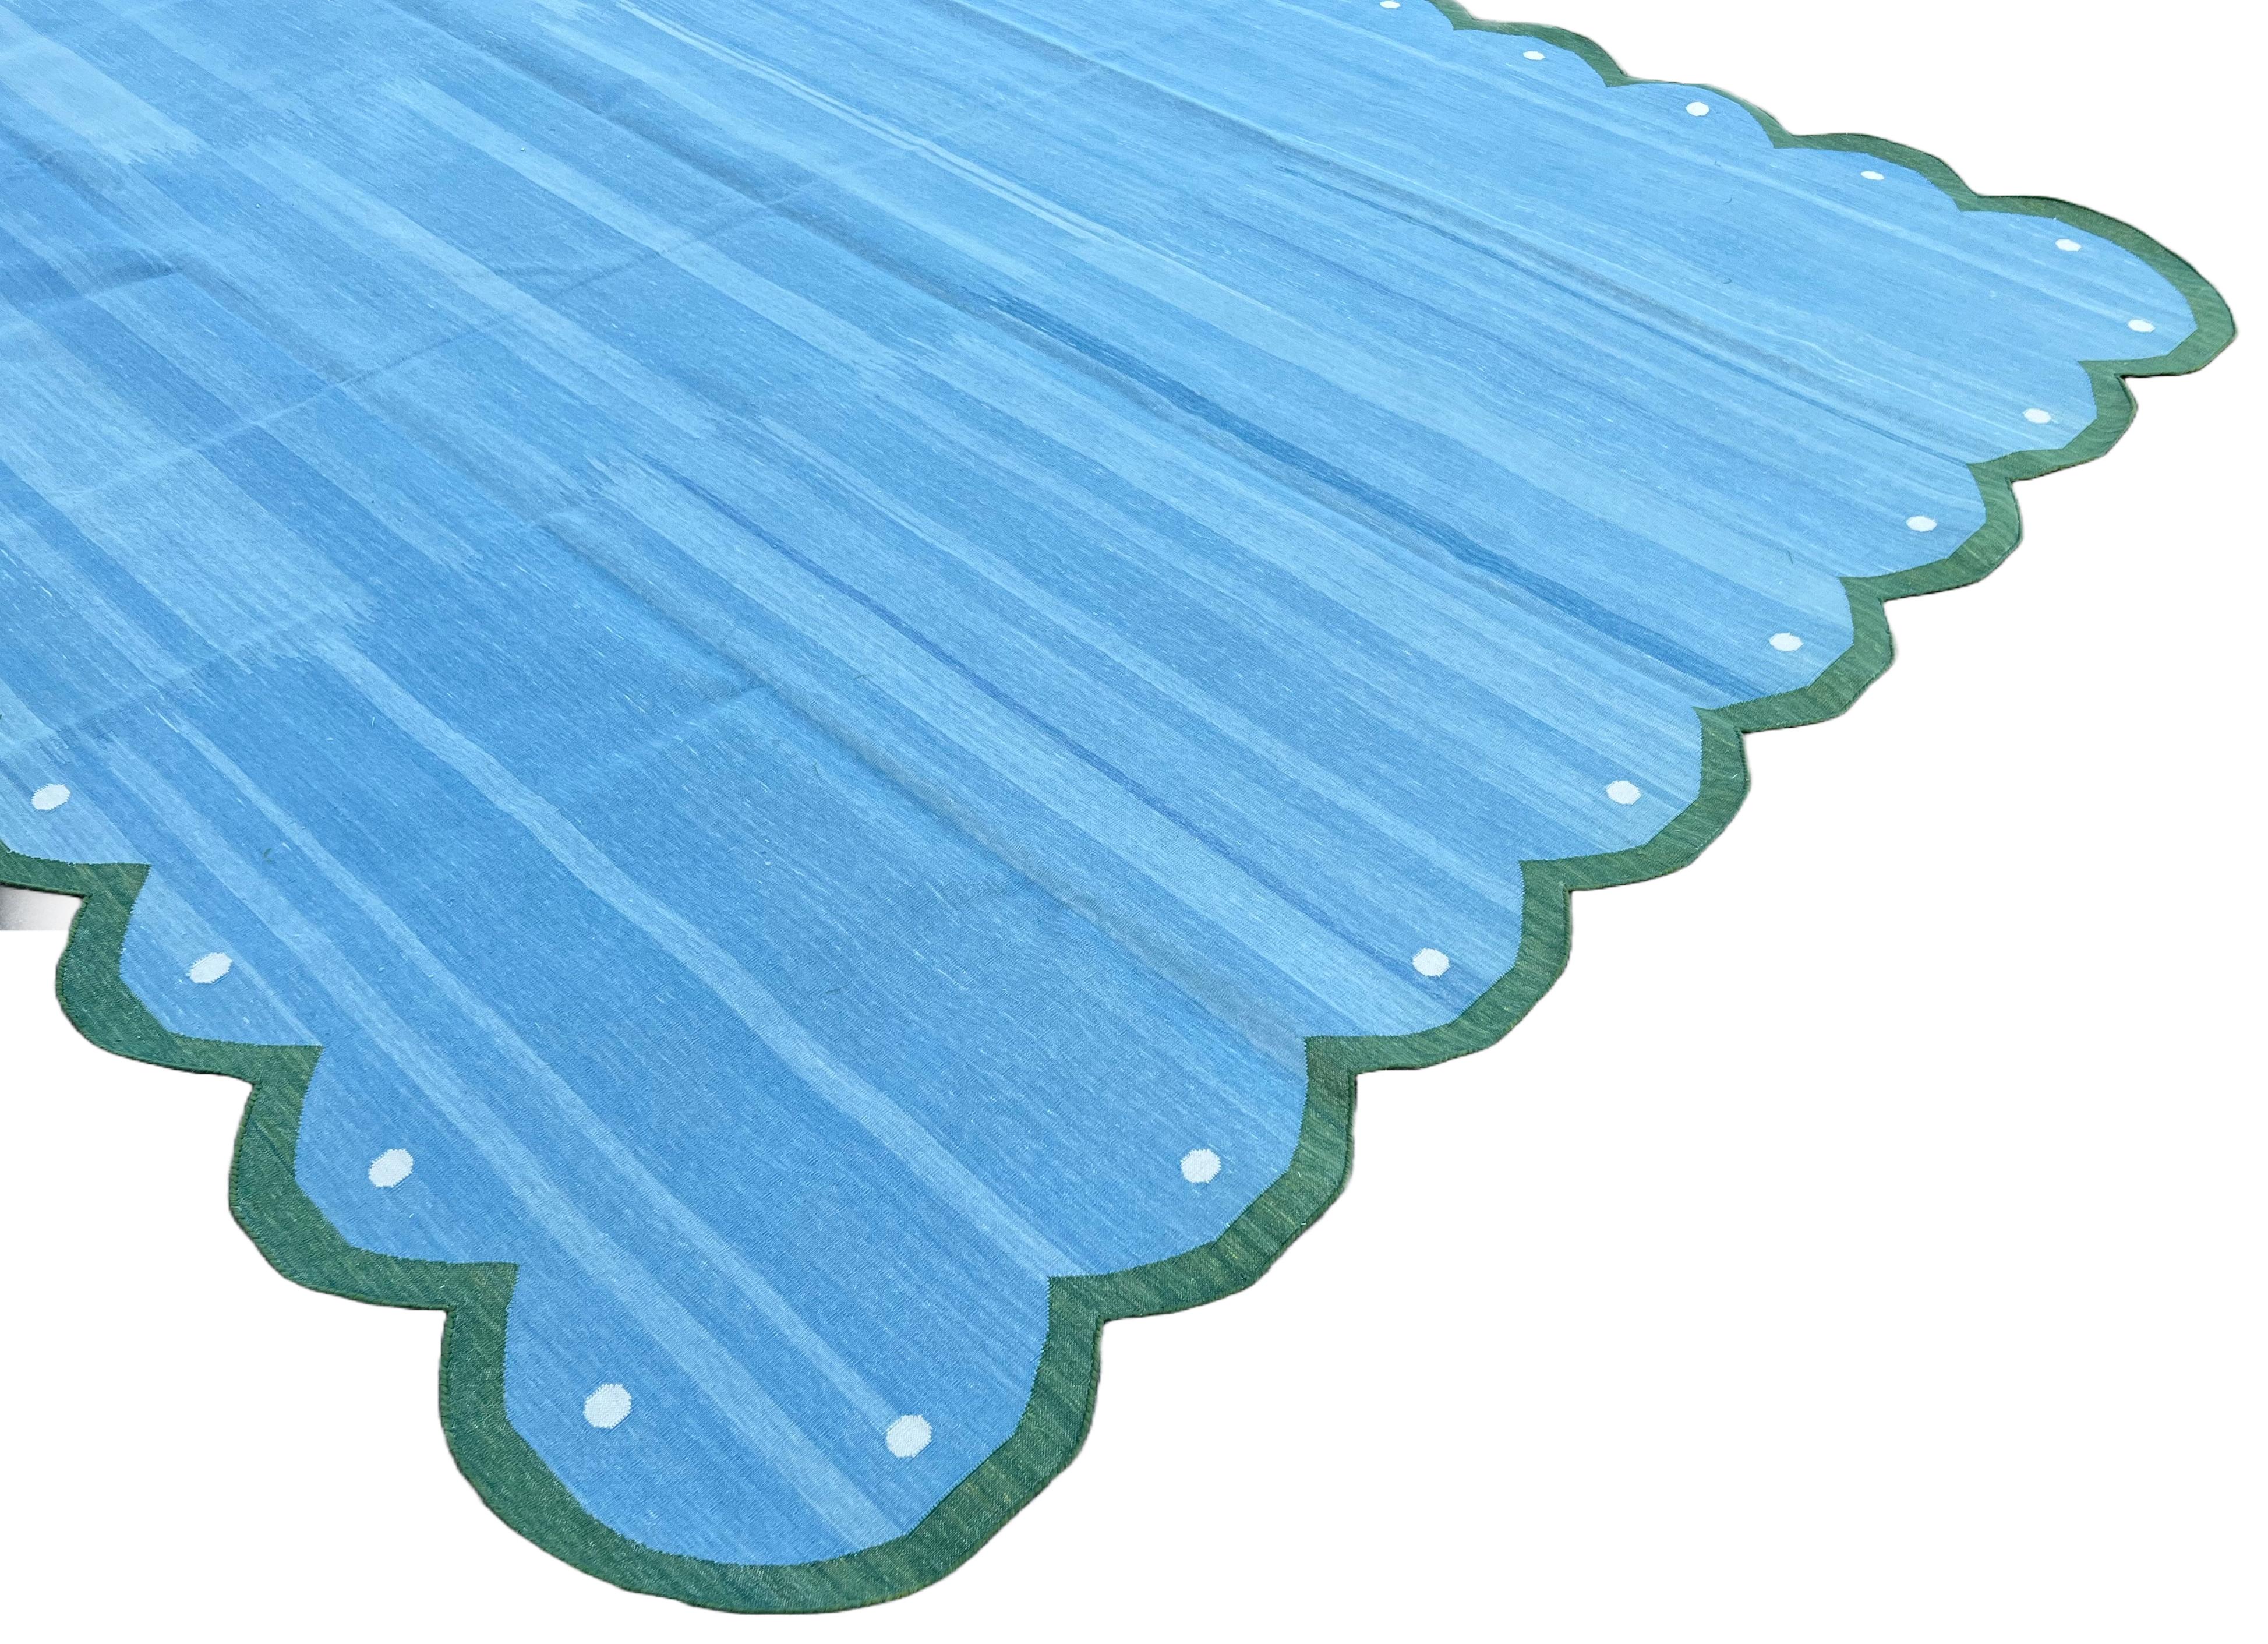 Hand-Woven Handmade Cotton Area Flat Weave Rug, Sky Blue And Green Scalloped Indian Dhurrie For Sale